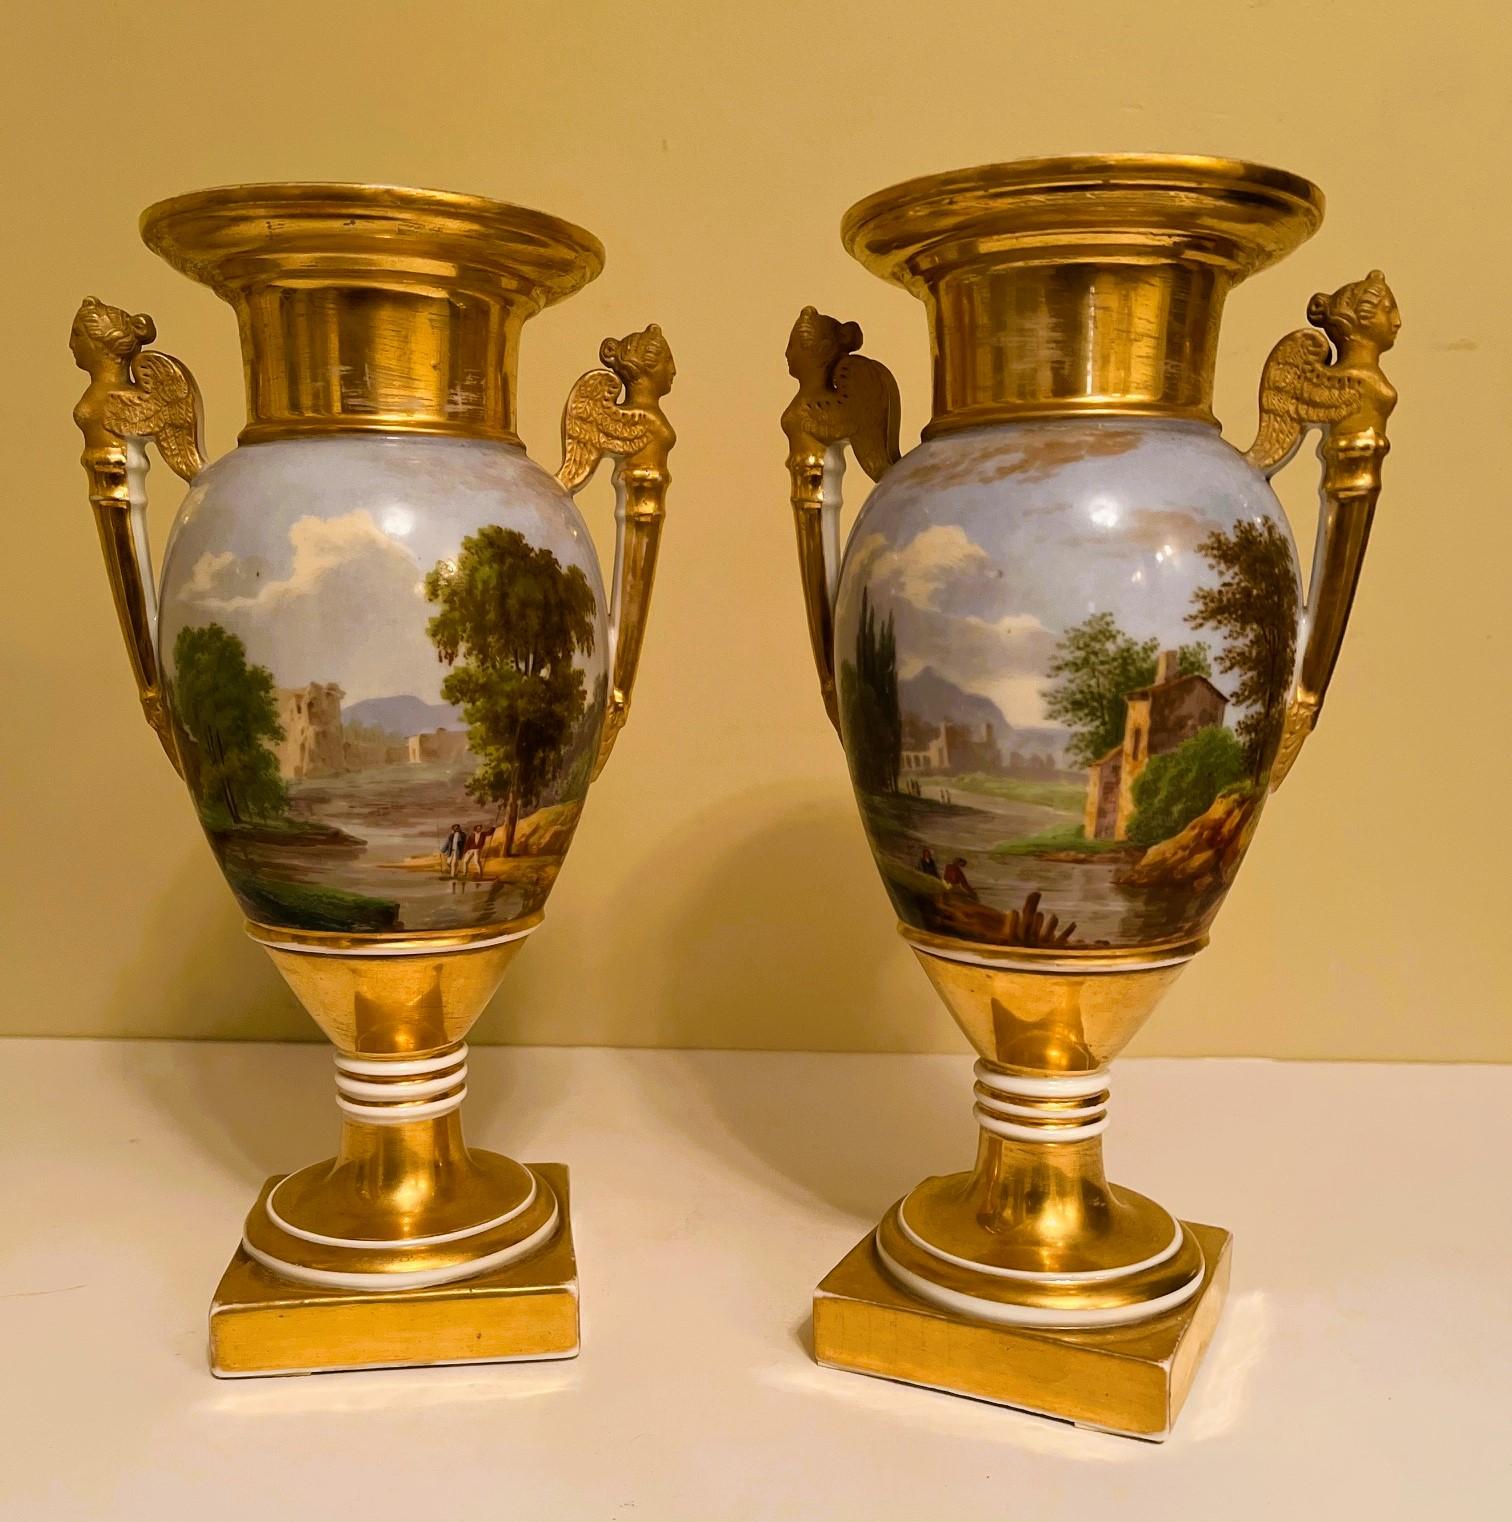 This is an exceptional pair of Old Paris vases with beautiful hand-painted panorama scenes. The bucolic scenes are of fashionably dressed people hanging out with cows by a meandering streams with medieval ruins in the background. The clouds and the